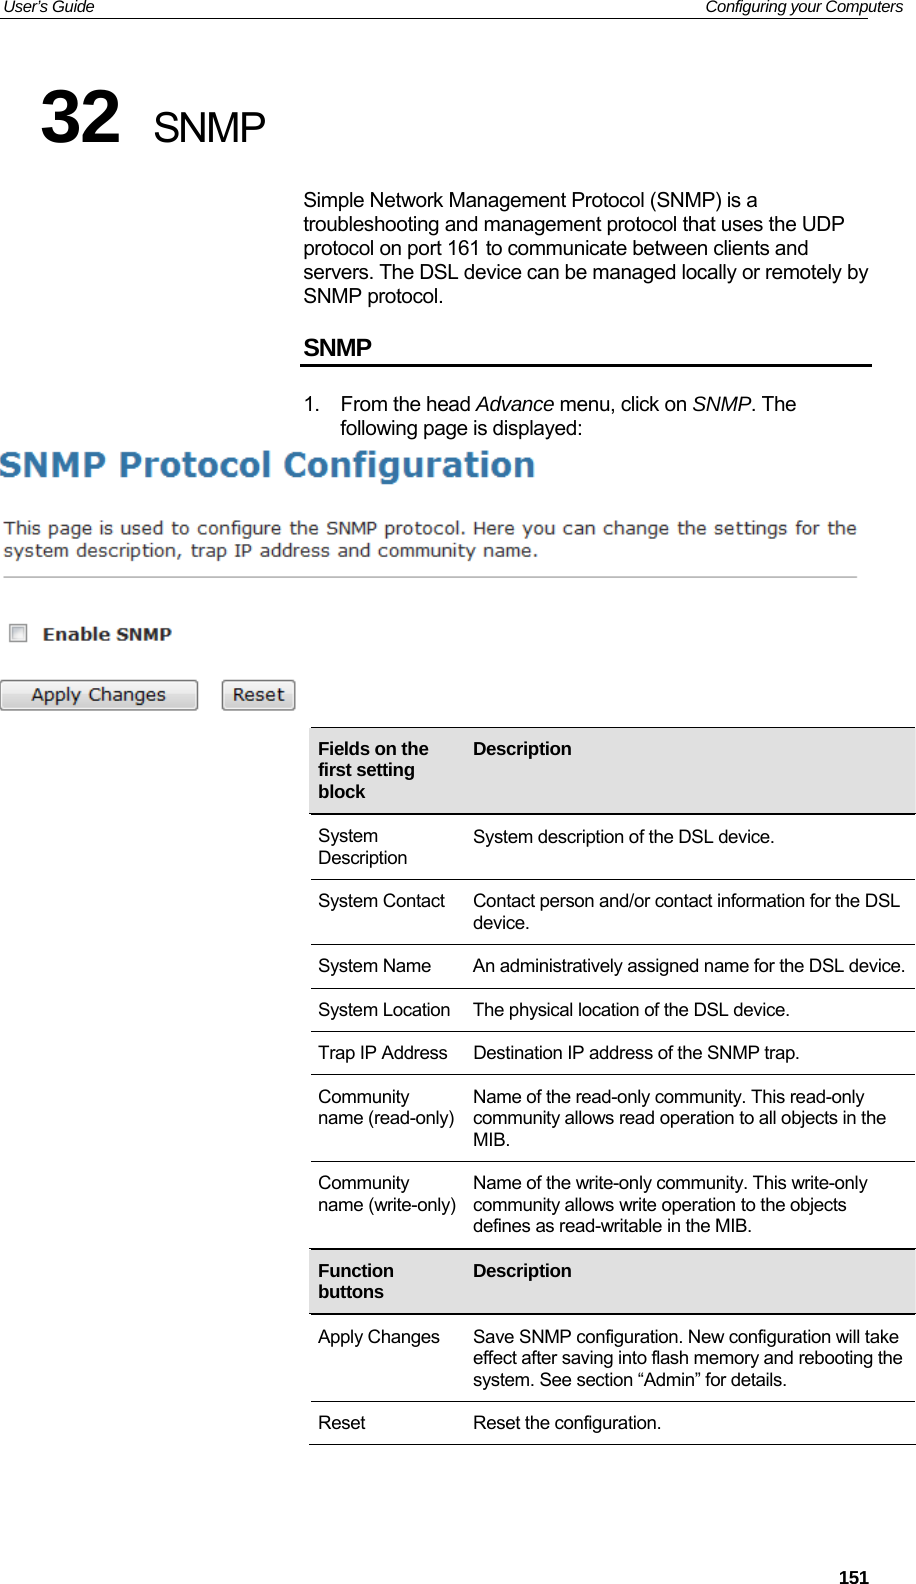 User’s Guide   Configuring your Computers 32  SNMP Simple Network Management Protocol (SNMP) is a troubleshooting and management protocol that uses the UDP protocol on port 161 to communicate between clients and servers. The DSL device can be managed locally or remotely by SNMP protocol. SNMP 1. From the head Advance menu, click on SNMP. The following page is displayed:     Fields on the first setting block Description  System Description System description of the DSL device. System Contact  Contact person and/or contact information for the DSL device. System Name  An administratively assigned name for the DSL device.System Location The physical location of the DSL device. Trap IP Address Destination IP address of the SNMP trap. Community name (read-only)Name of the read-only community. This read-only community allows read operation to all objects in the MIB. Community name (write-only)Name of the write-only community. This write-only community allows write operation to the objects defines as read-writable in the MIB.               Function buttons  Description     Apply Changes  Save SNMP configuration. New configuration will take effect after saving into flash memory and rebooting the system. See section “Admin” for details. Reset Reset the configuration.   151